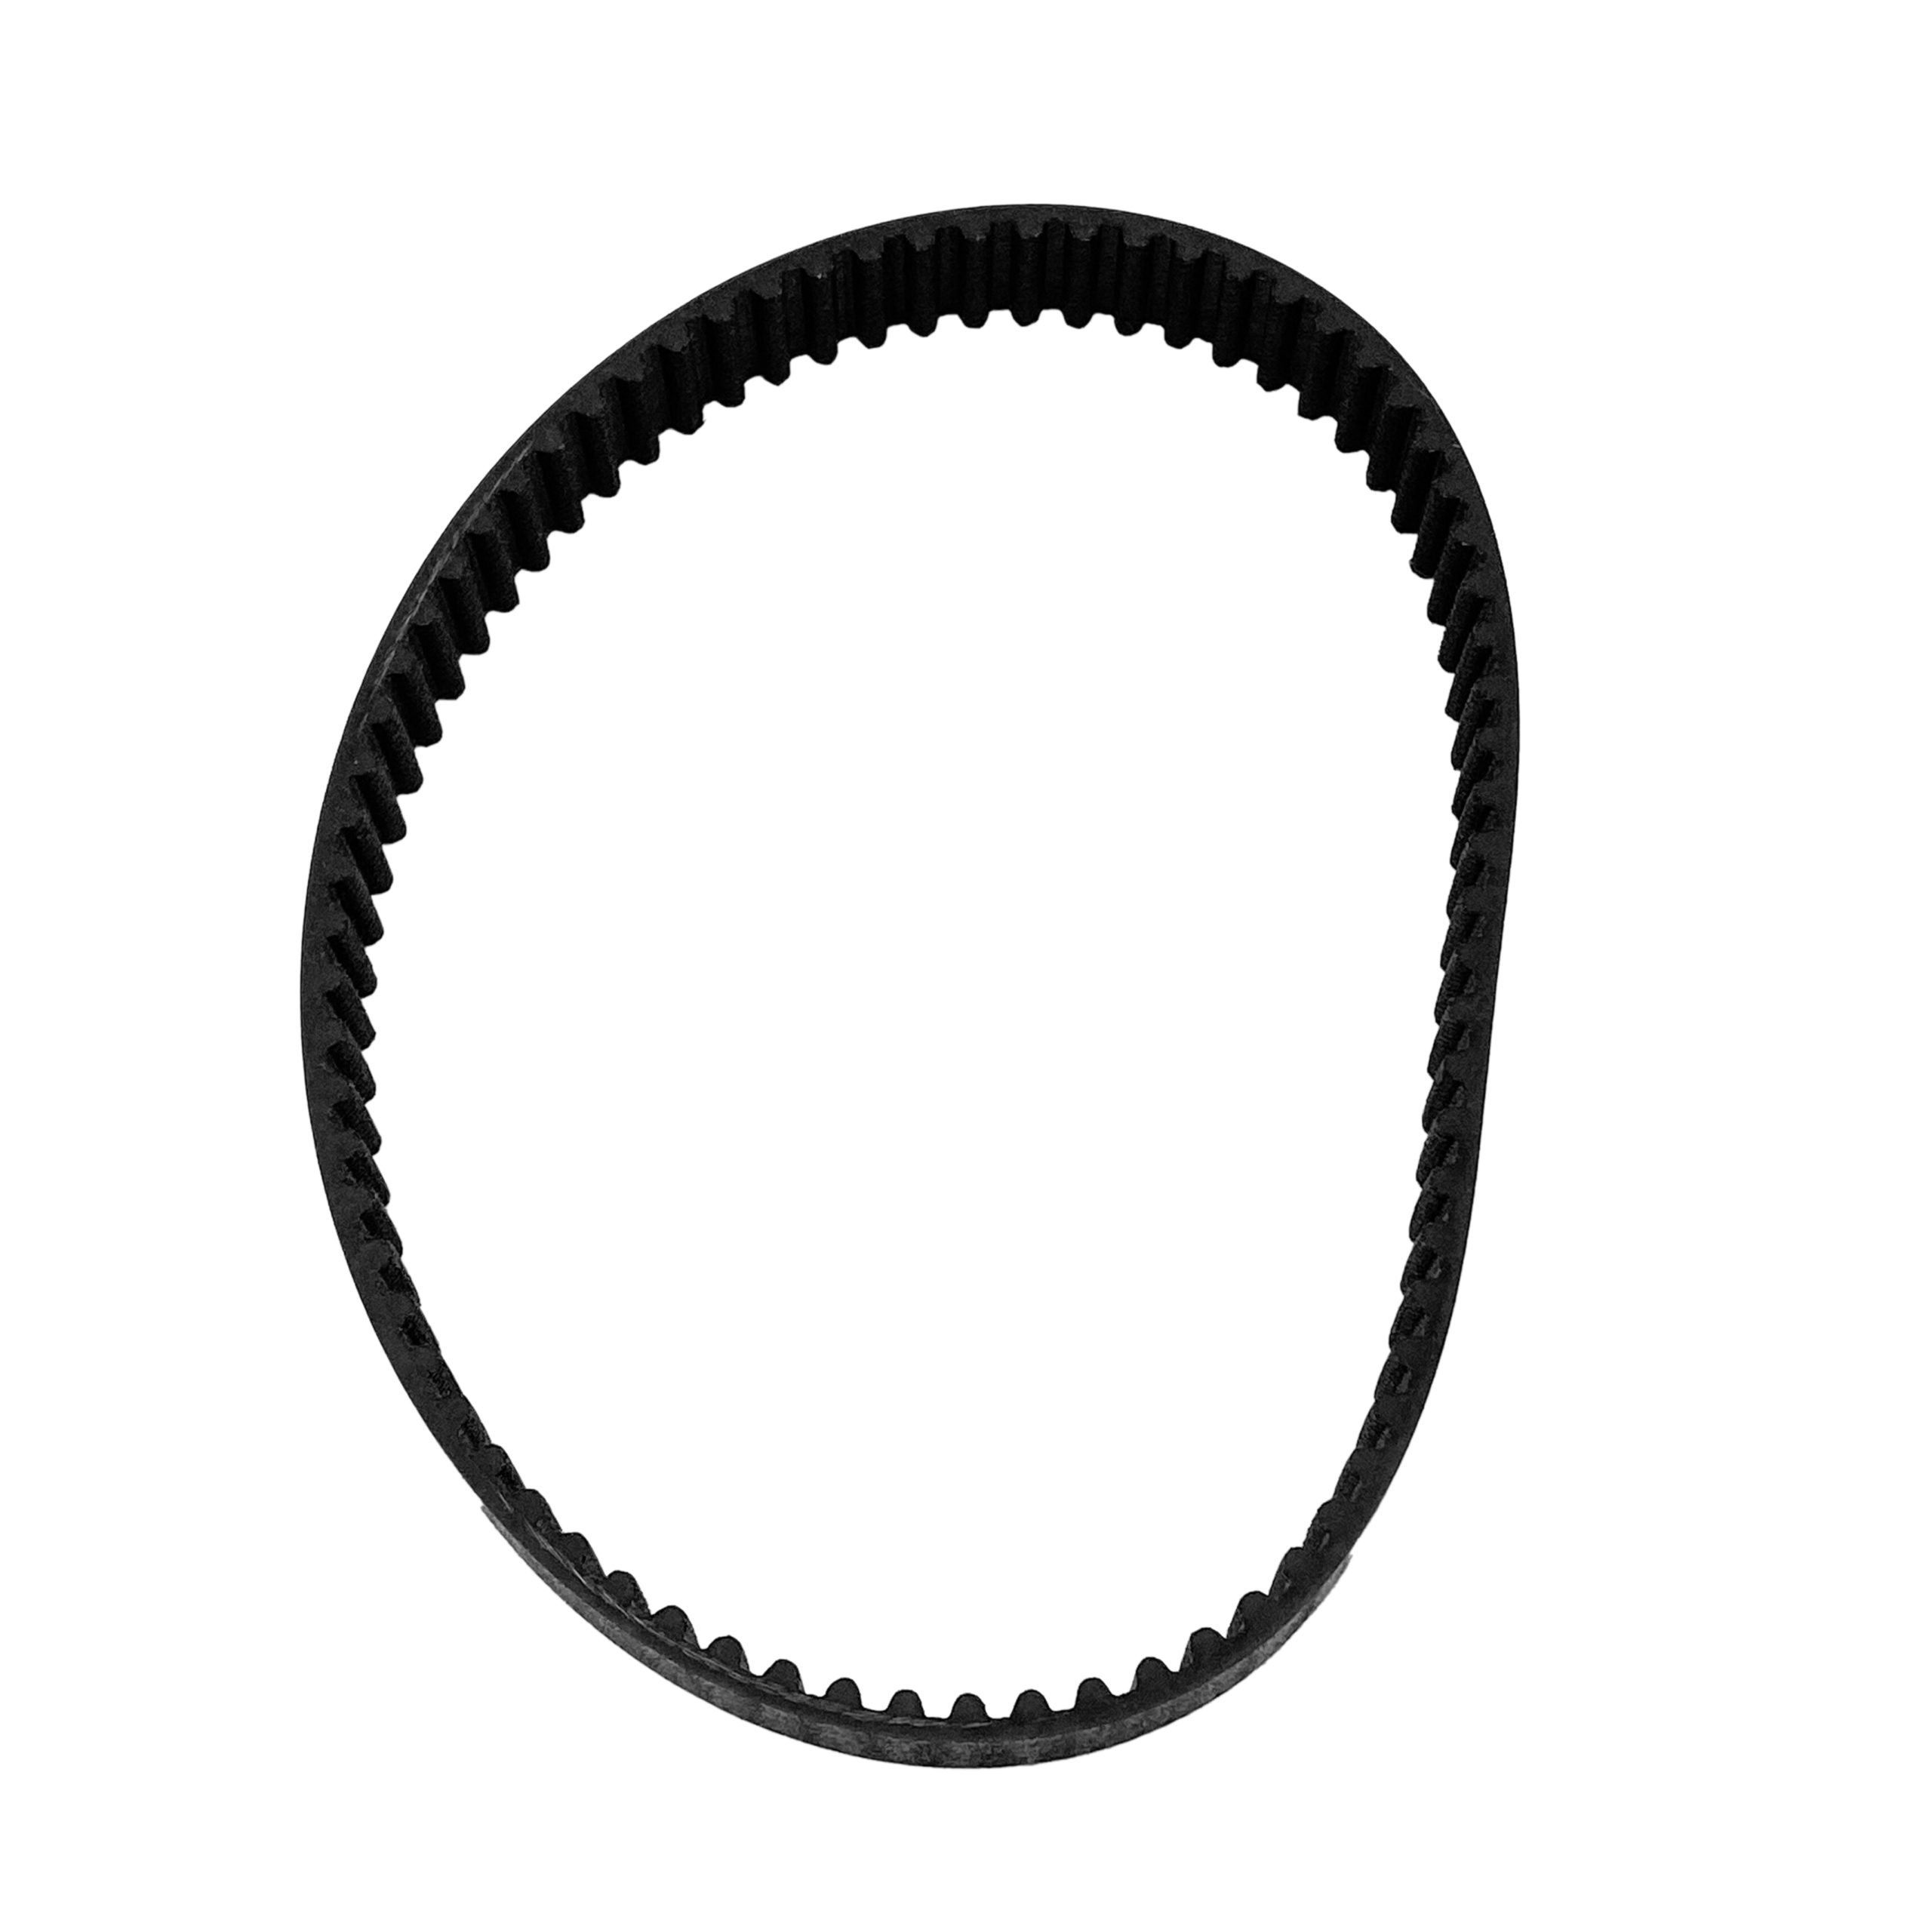 Haas HRT 160 Drive Belt Replace the drive belt on your HRT 160 with this belt.